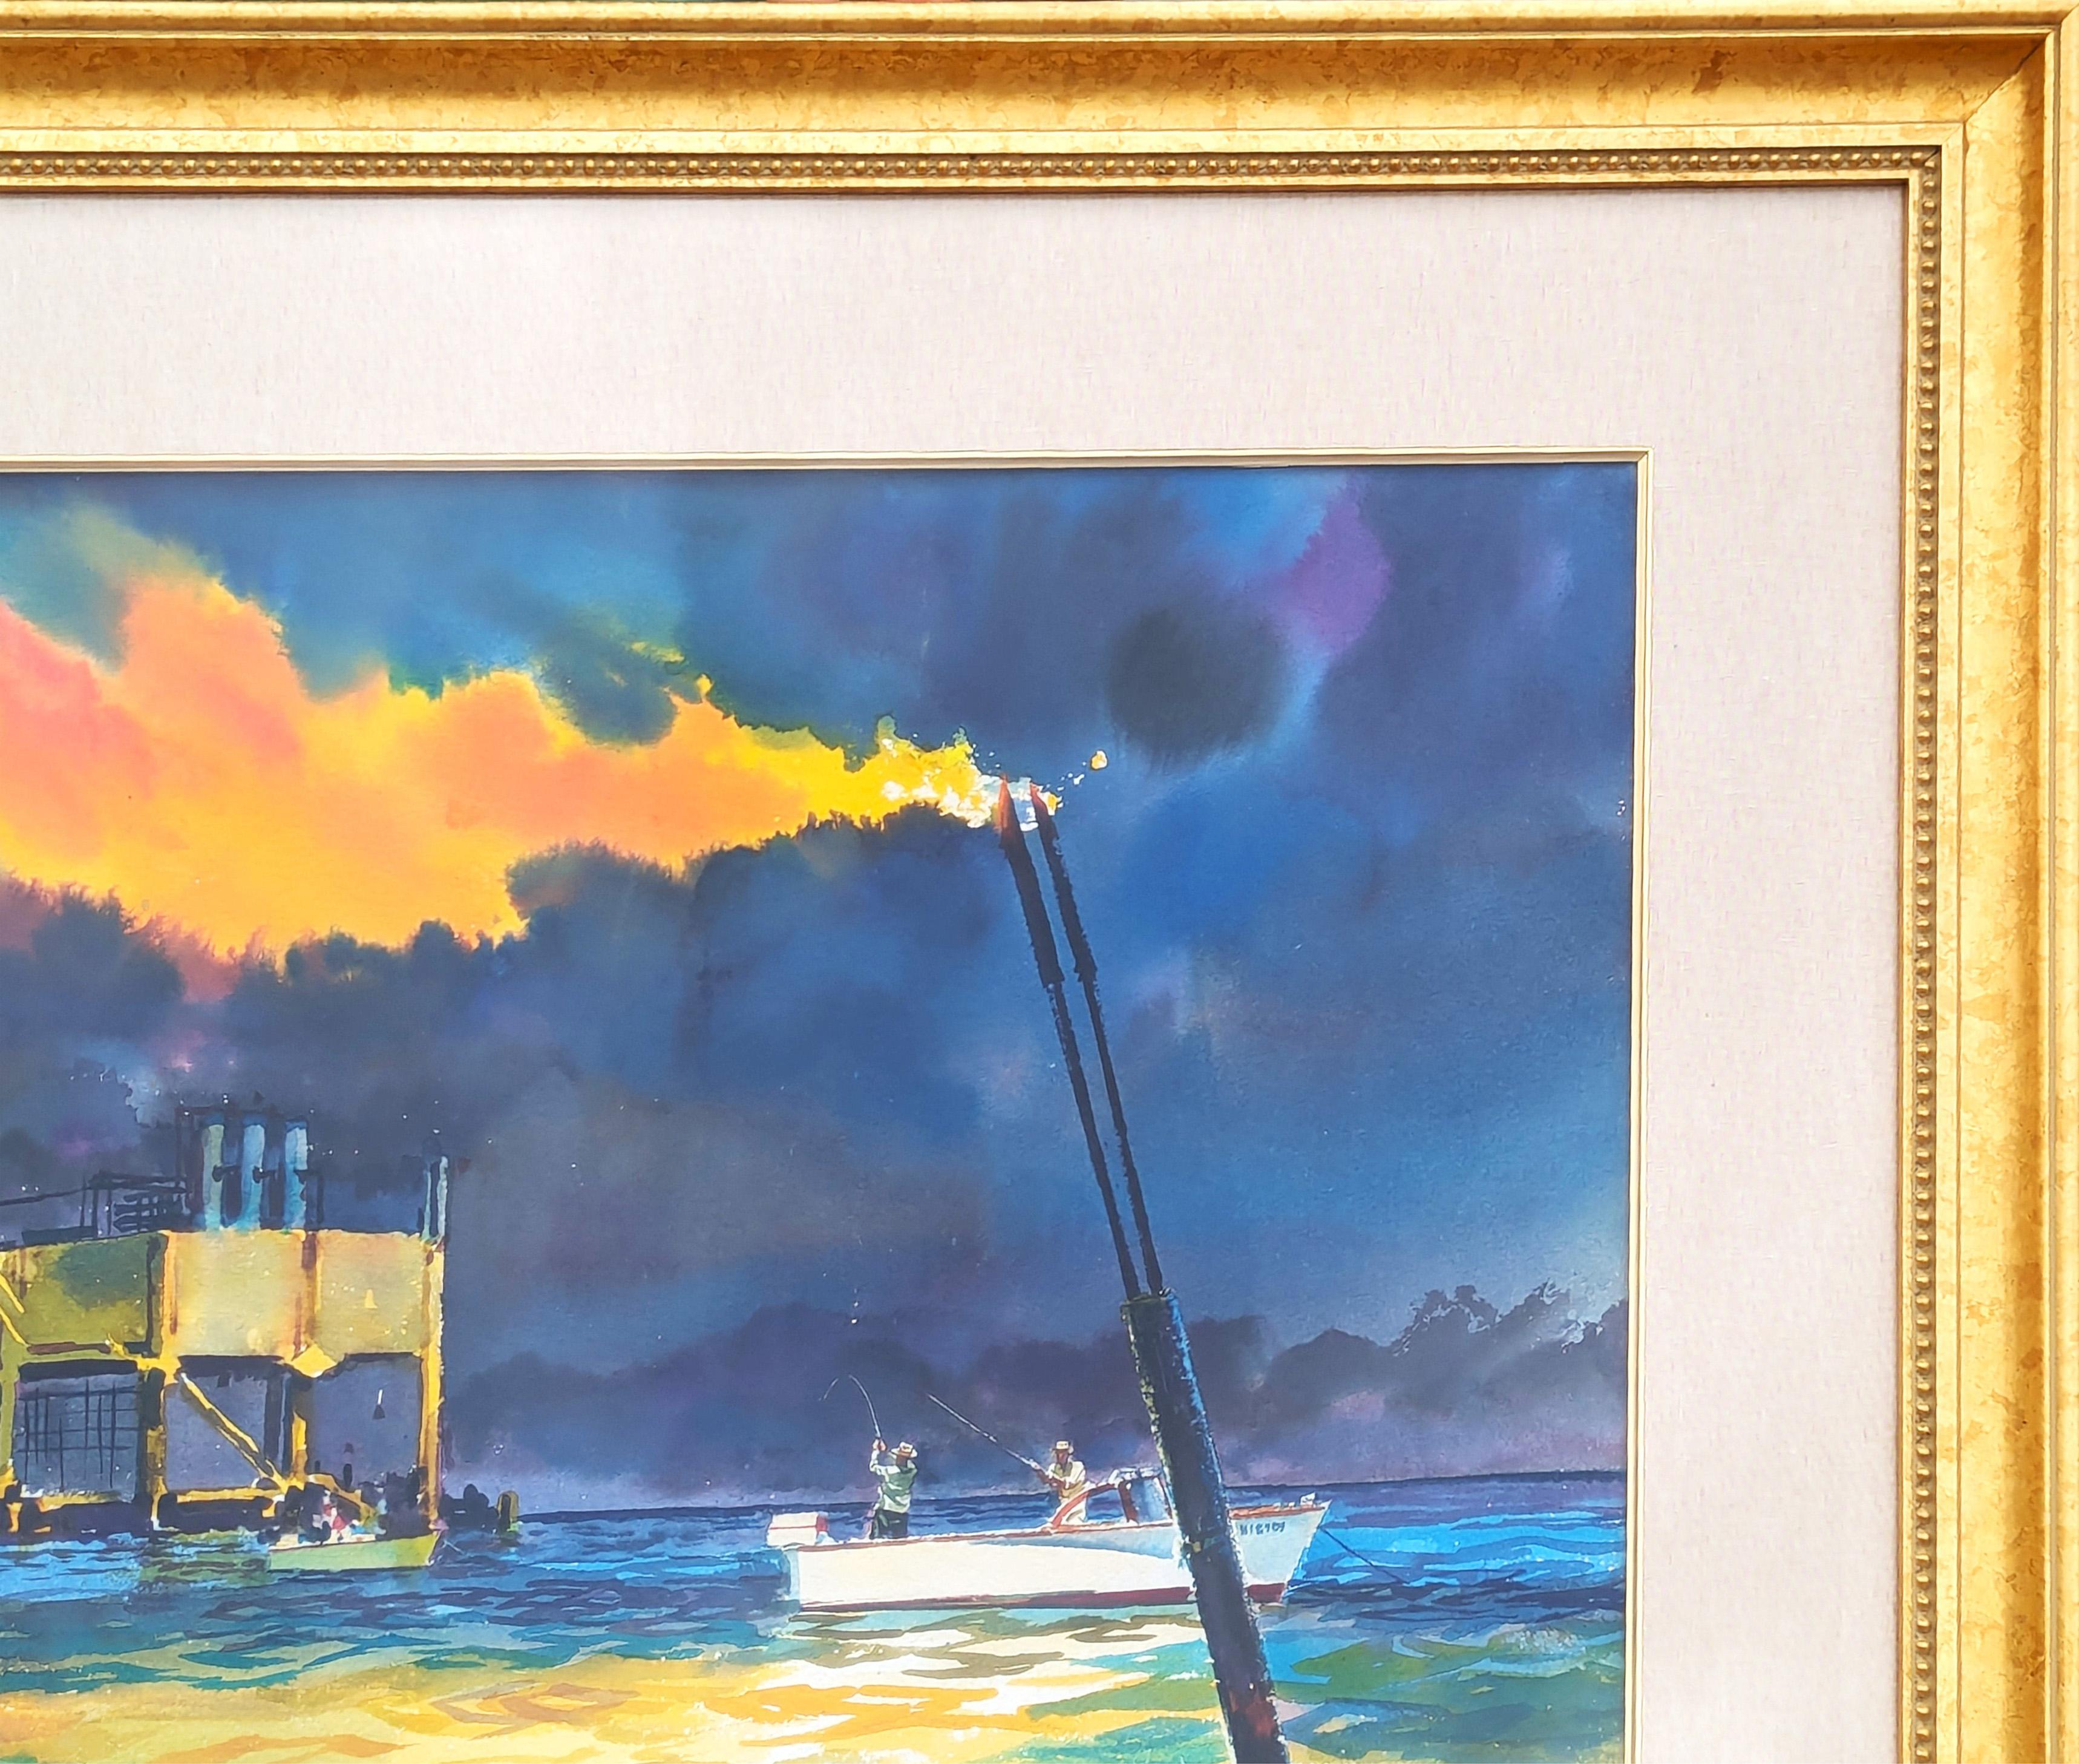 Modern watercolor seascape painting by renowned sporting artists John P. Cowan. The work was originally created by Cowan to be used by Schlumberger as part of their fishing schedule calendar. Signed in the front lower left corner. Currently hung in